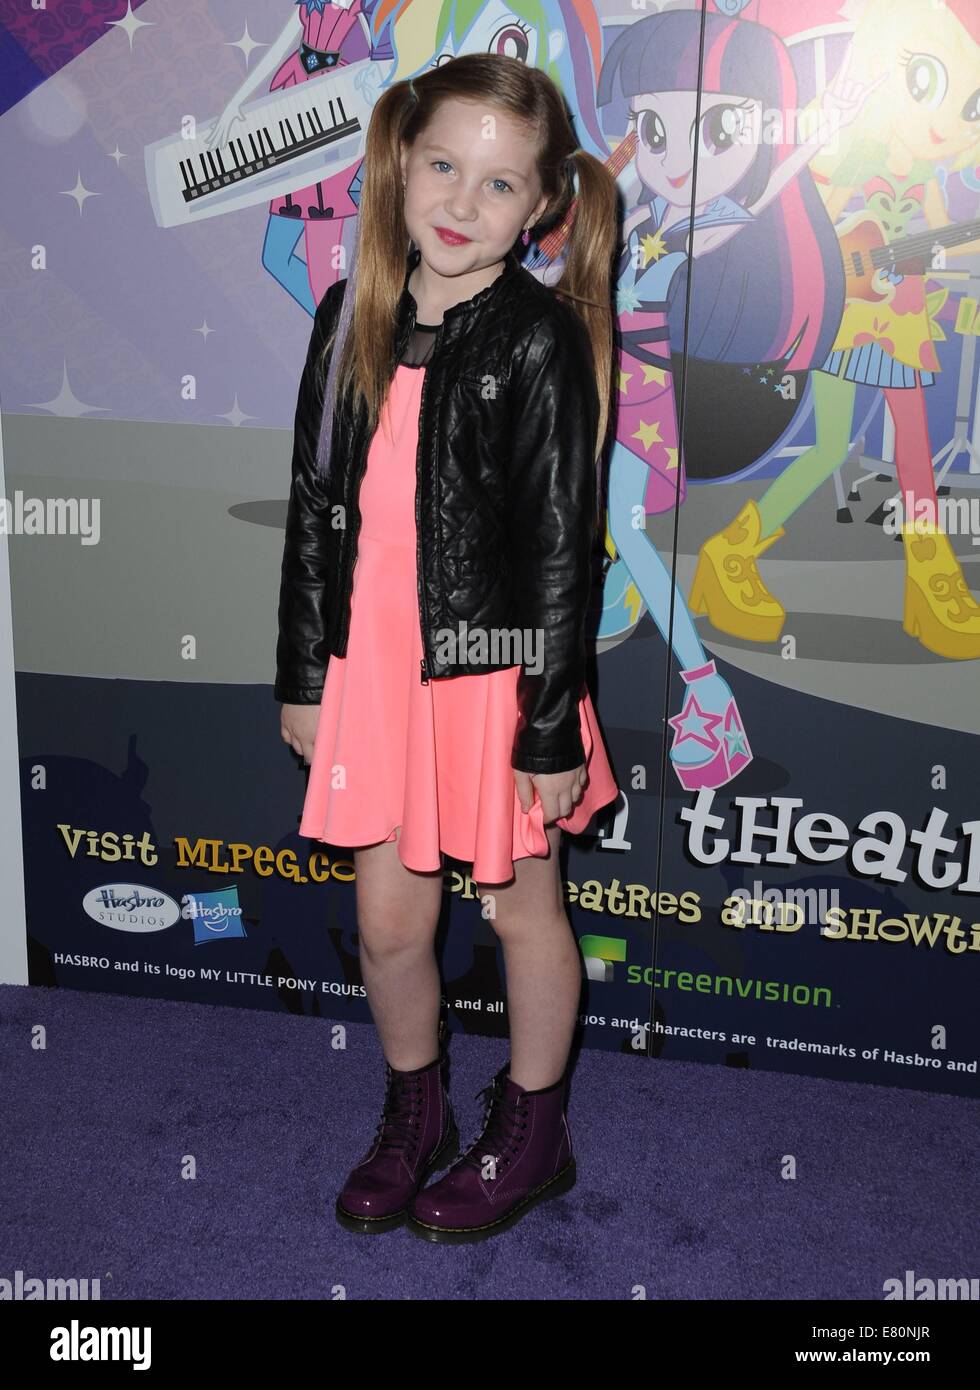 Los Angeles, CA, USA. 27th Sep, 2014. Ella Anderson at arrivals for My Little Pony Equestria Girls Premiere Premiere, TCL Chinese 6 Theatres (formerly Grauman's), Los Angeles, CA September 27, 2014. Credit:  Dee Cercone/Everett Collection/Alamy Live News Stock Photo